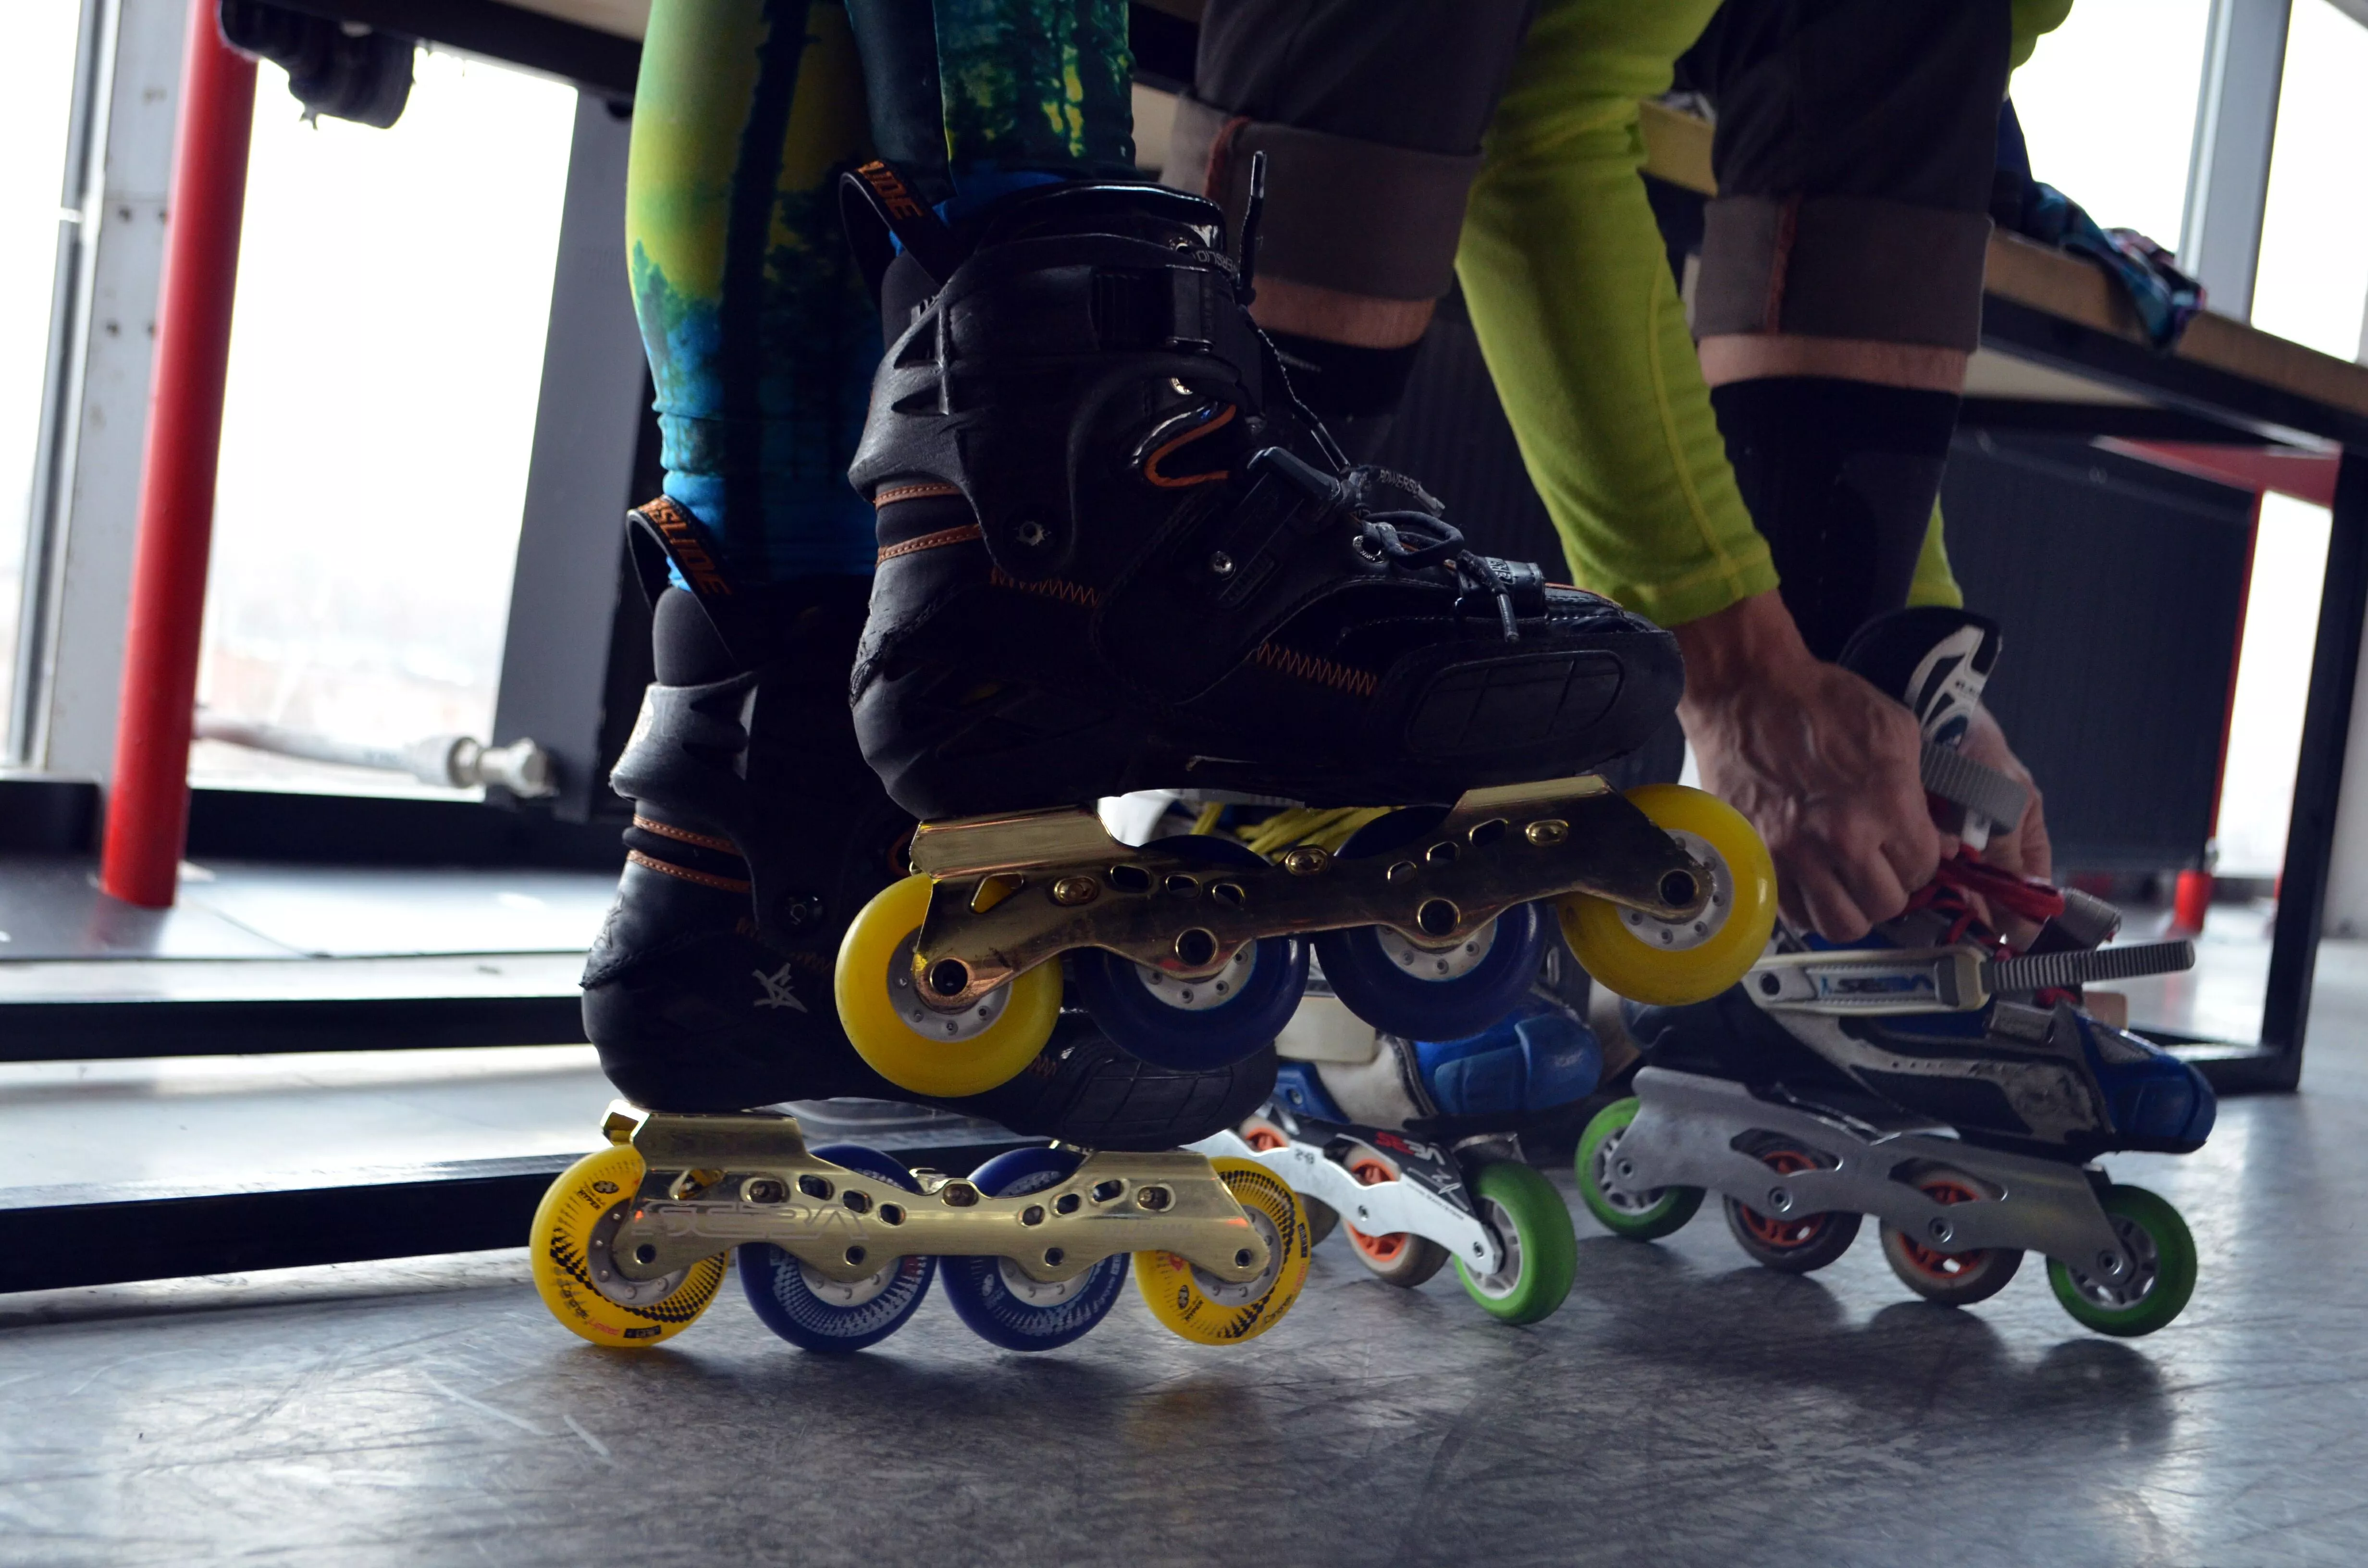 Roller Gliss in France, Europe | Roller Skating & Inline Skating - Rated 4.6